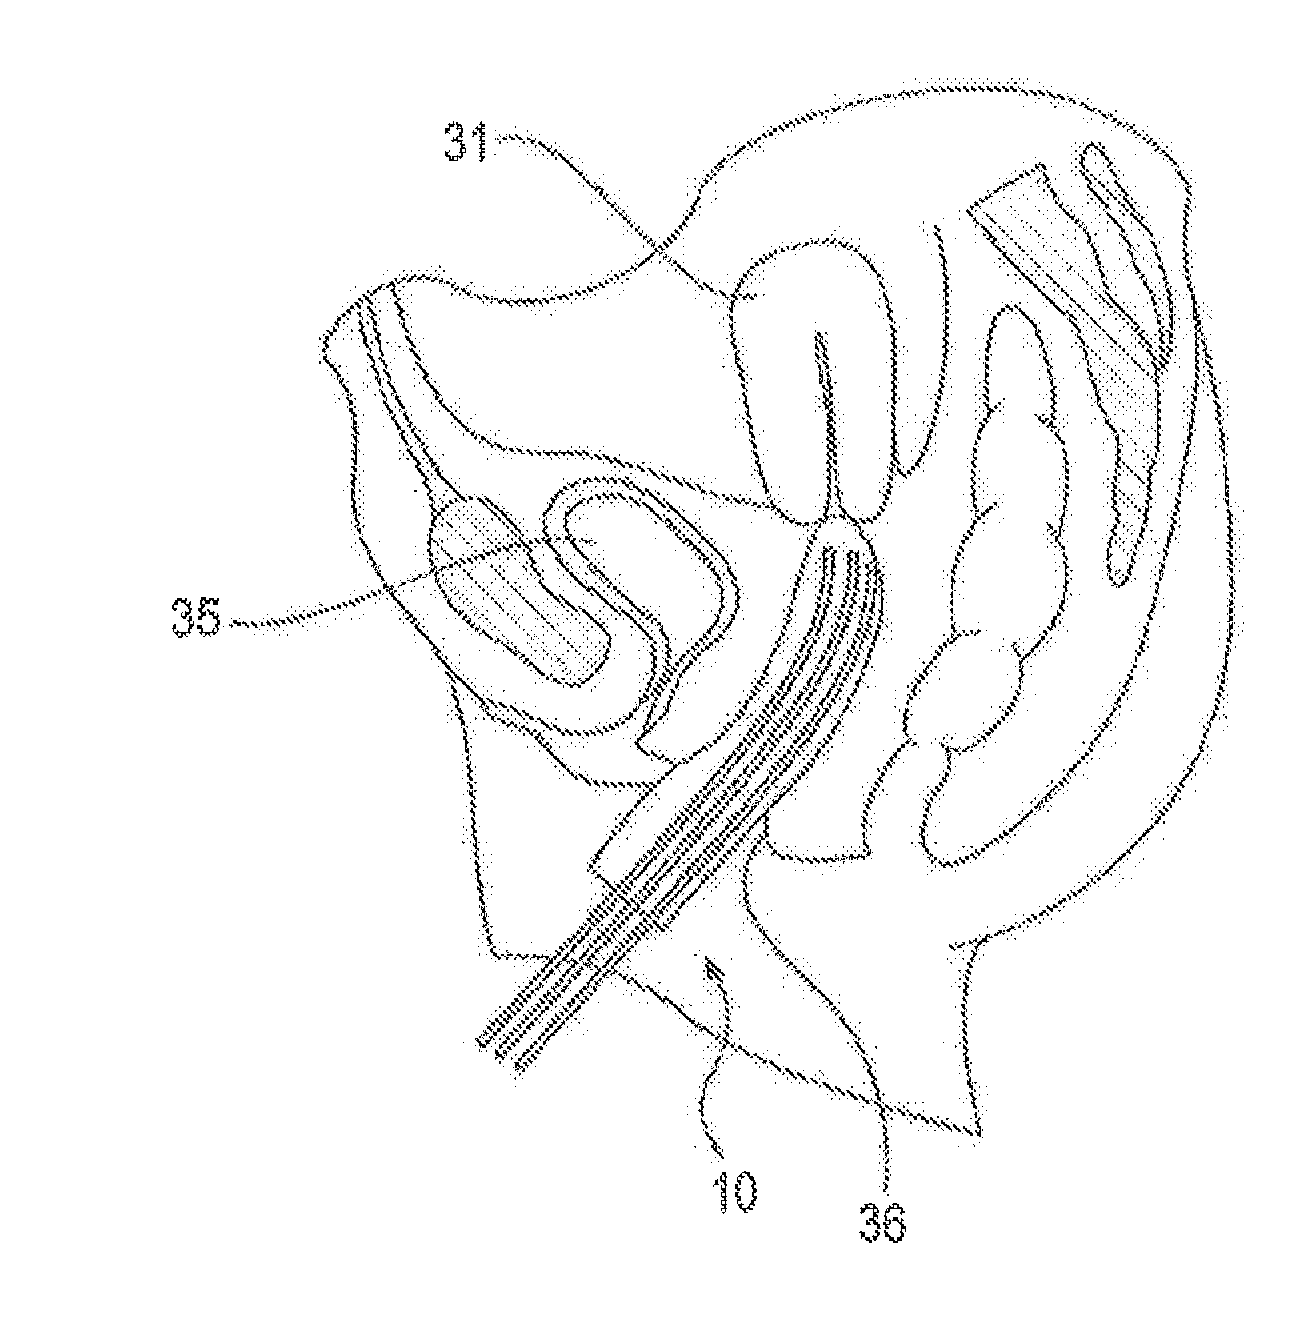 Medical applicator and methods of making